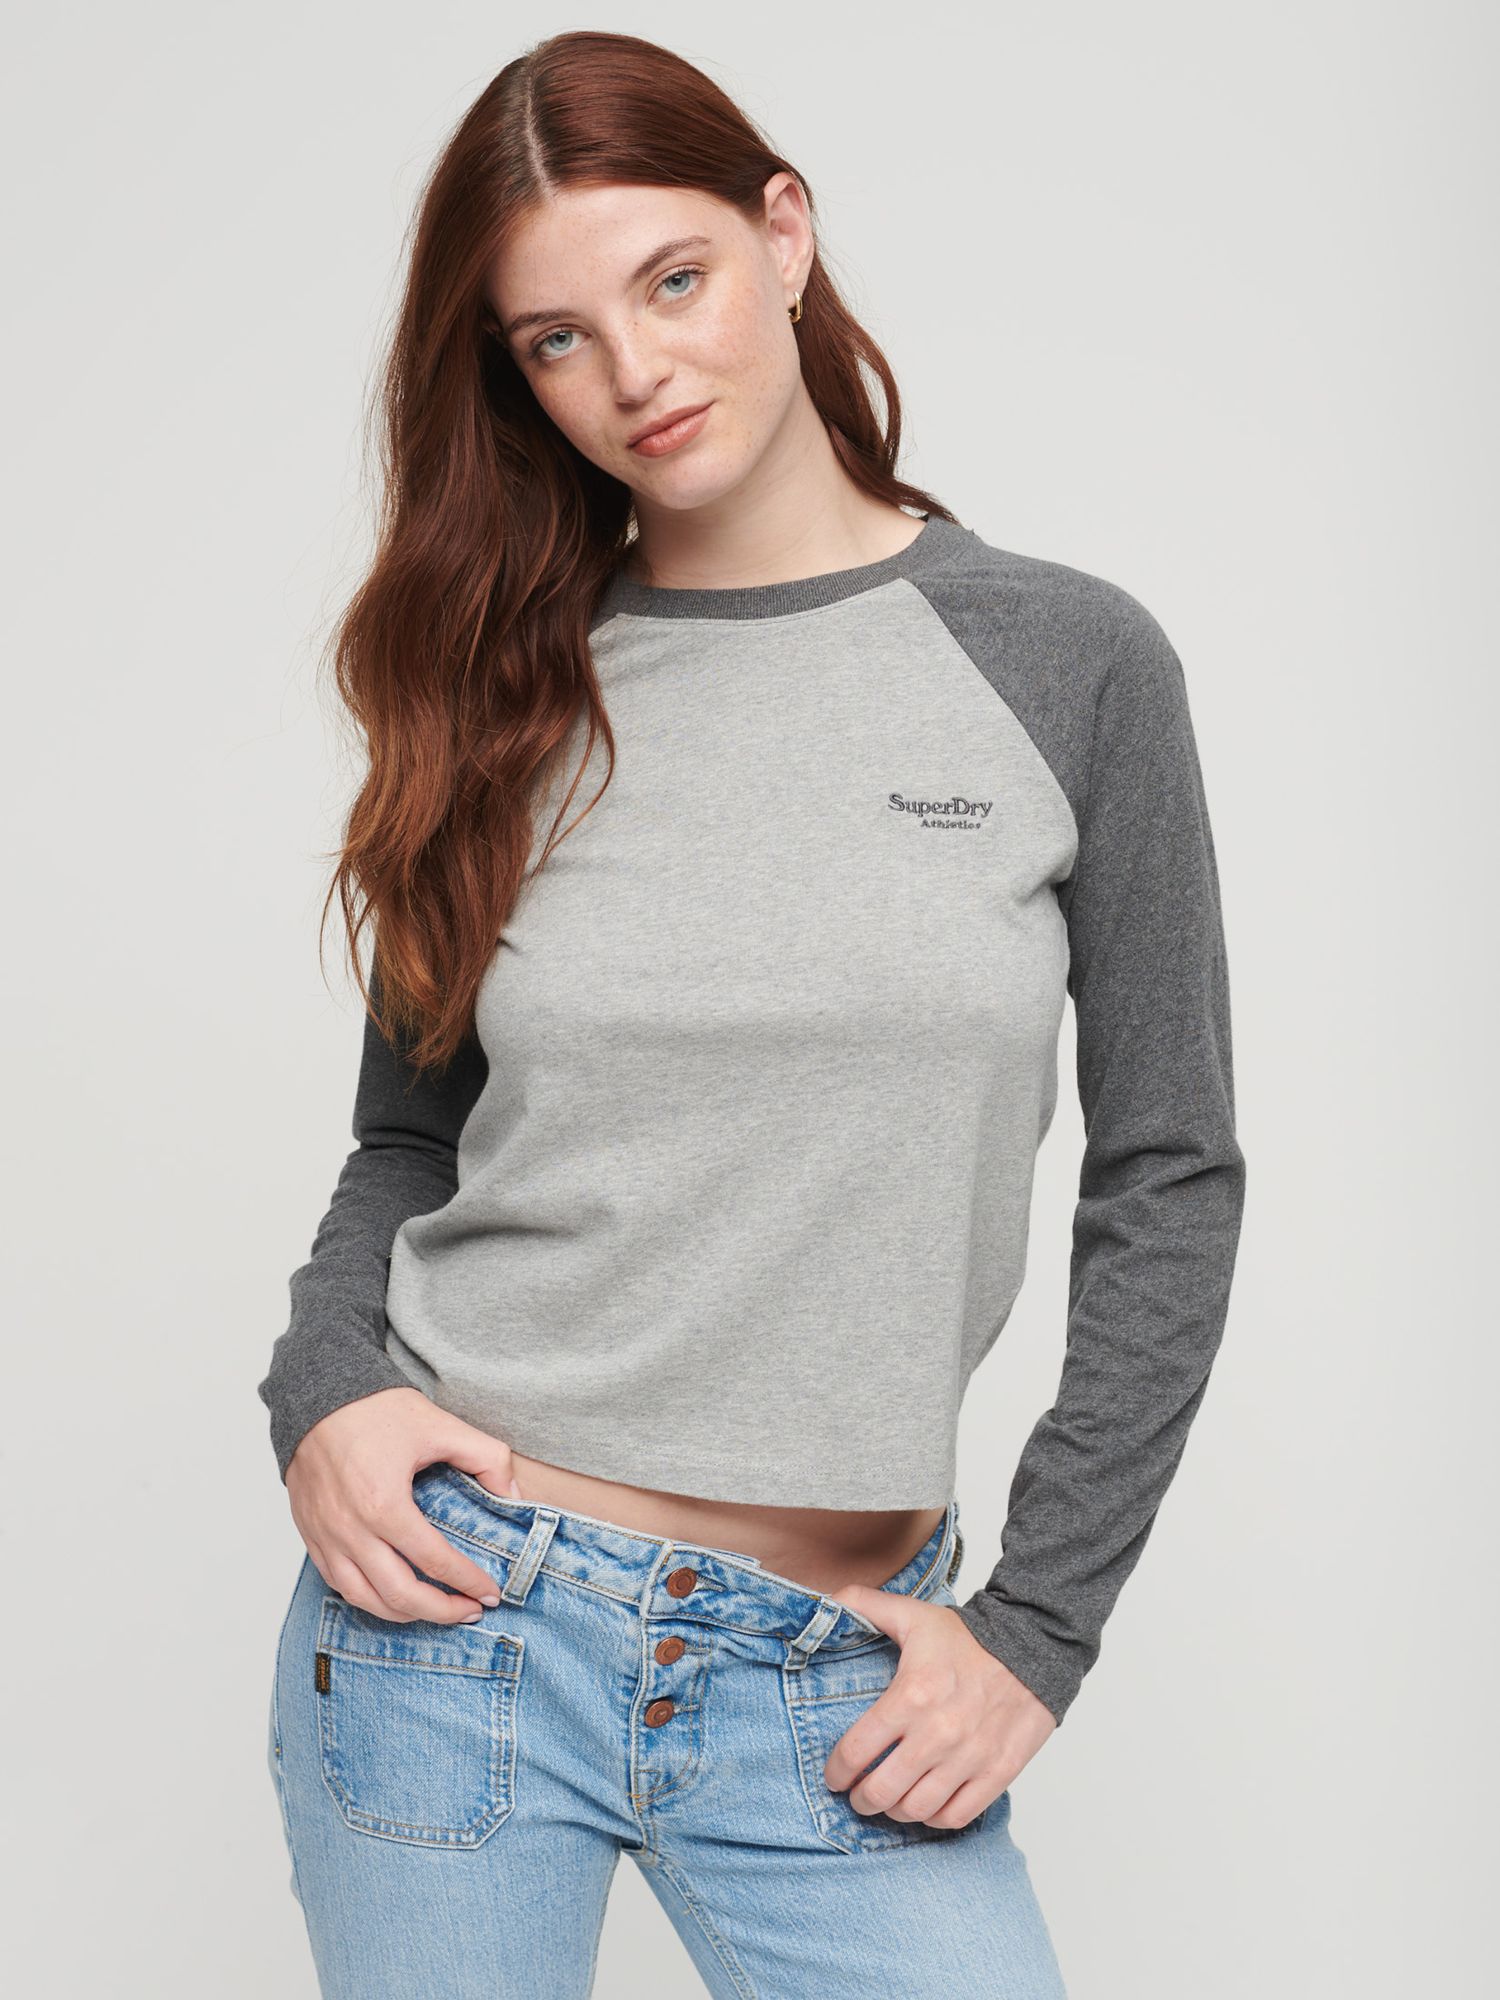 Superdry Essential Logo Baseball Top, Rich Charcoal Grey at John Lewis ...